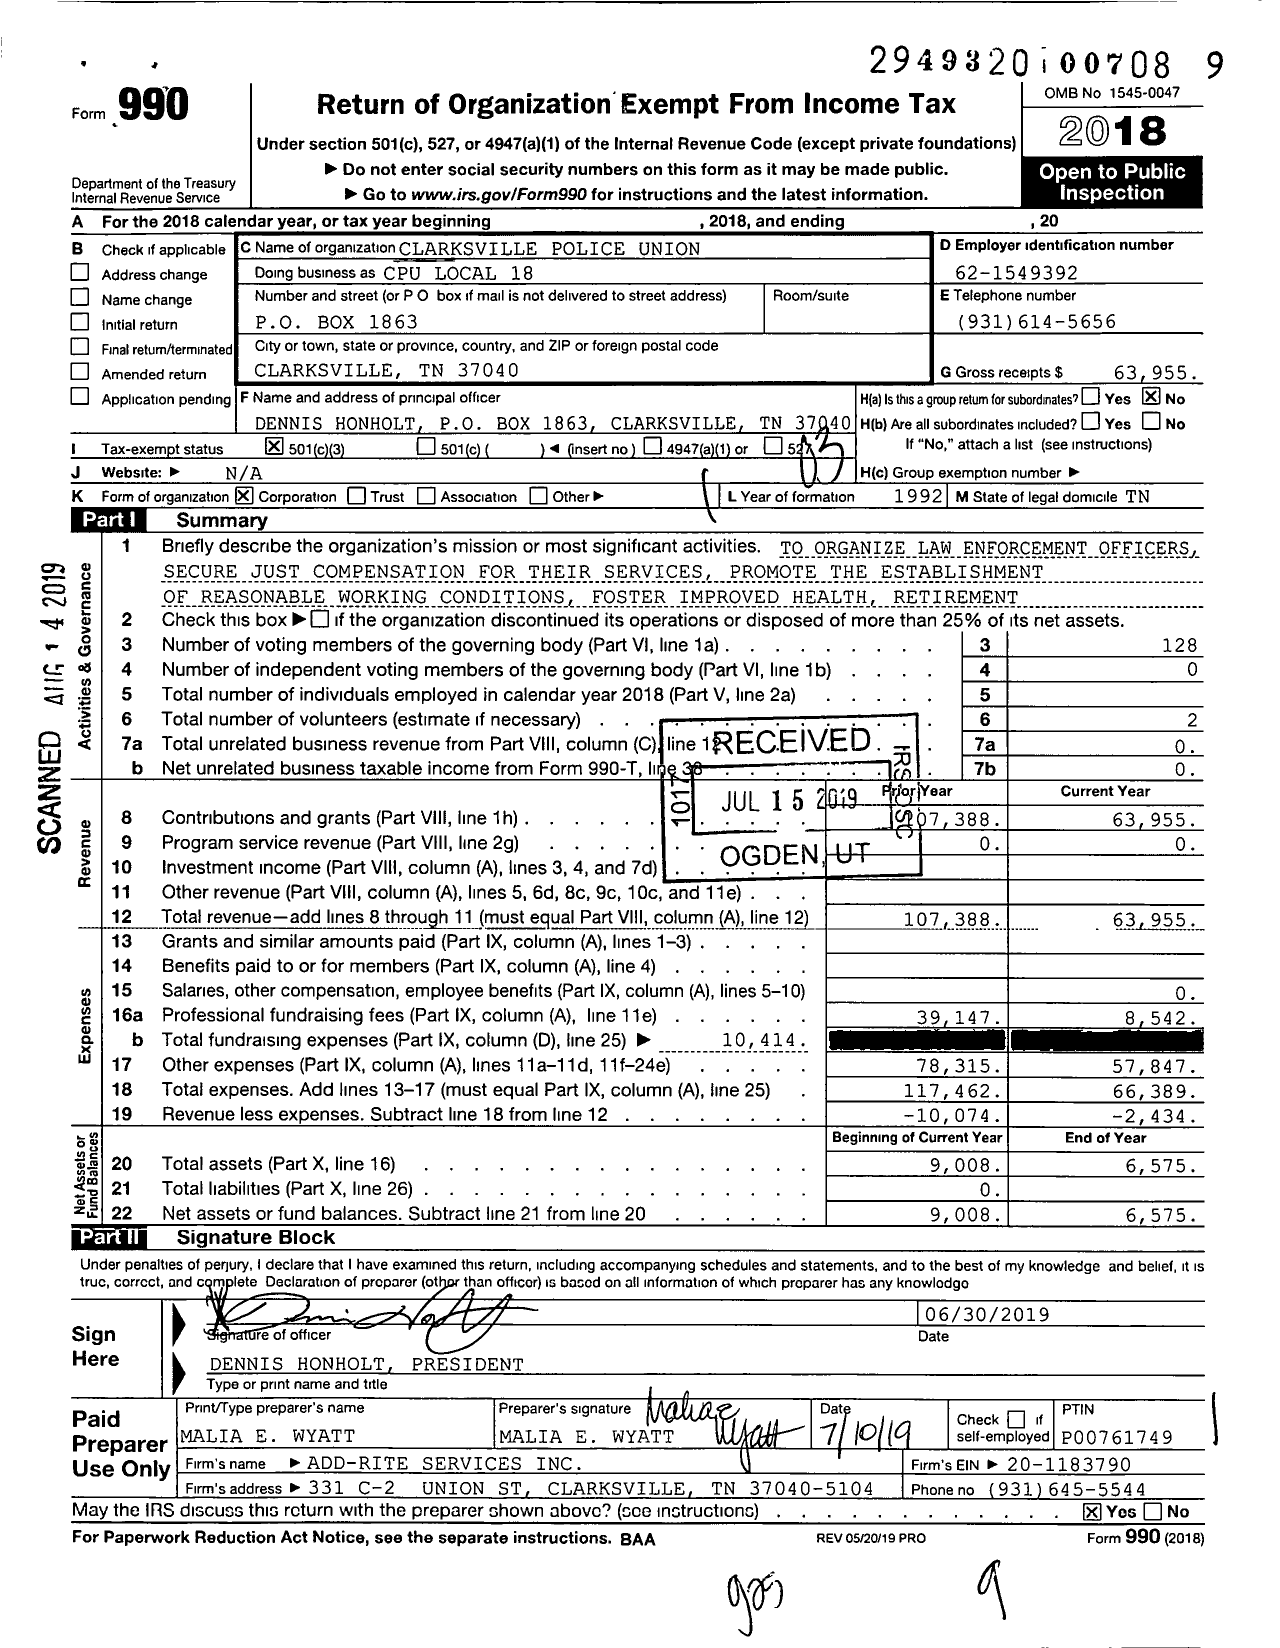 Image of first page of 2018 Form 990 for Clarksville Police Union Cpu Local 18